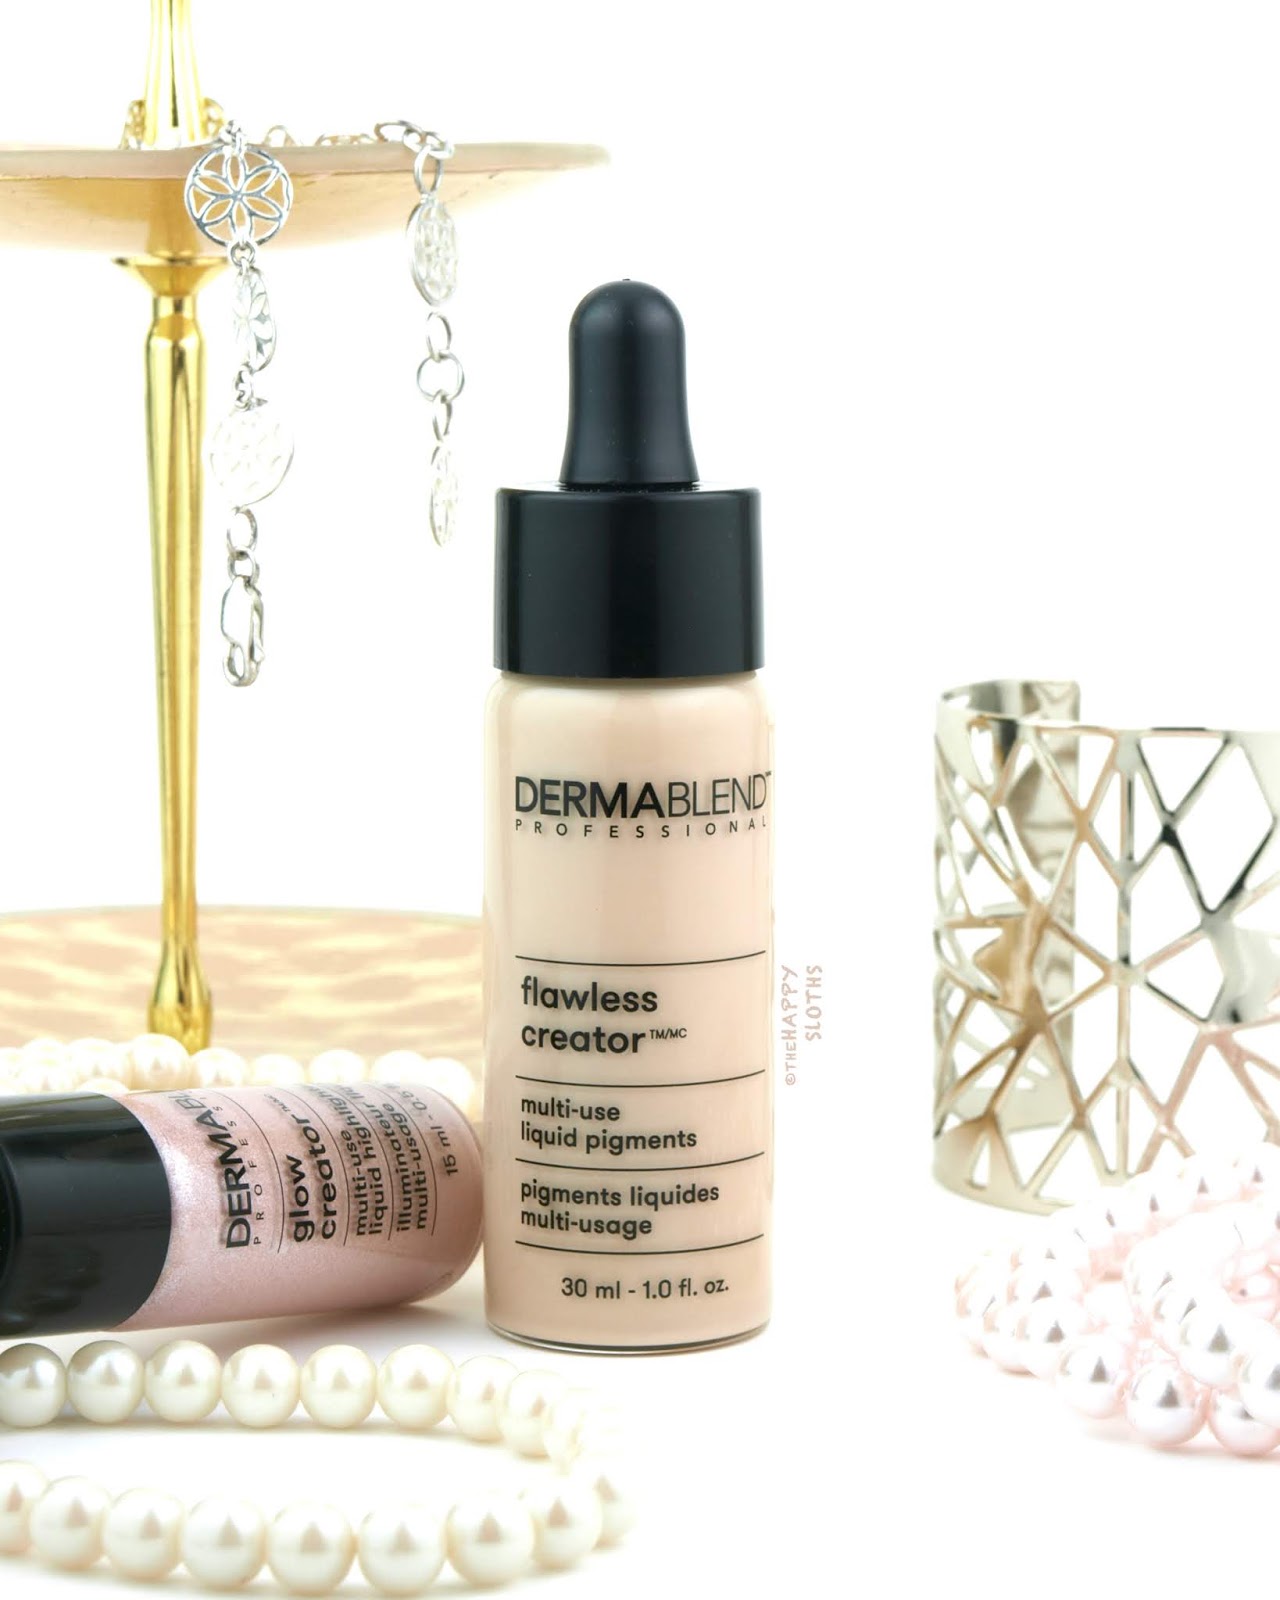 Dermablend | Flawless Creator Multi-Use Liquid Pigments in "10N": Review and Swatches